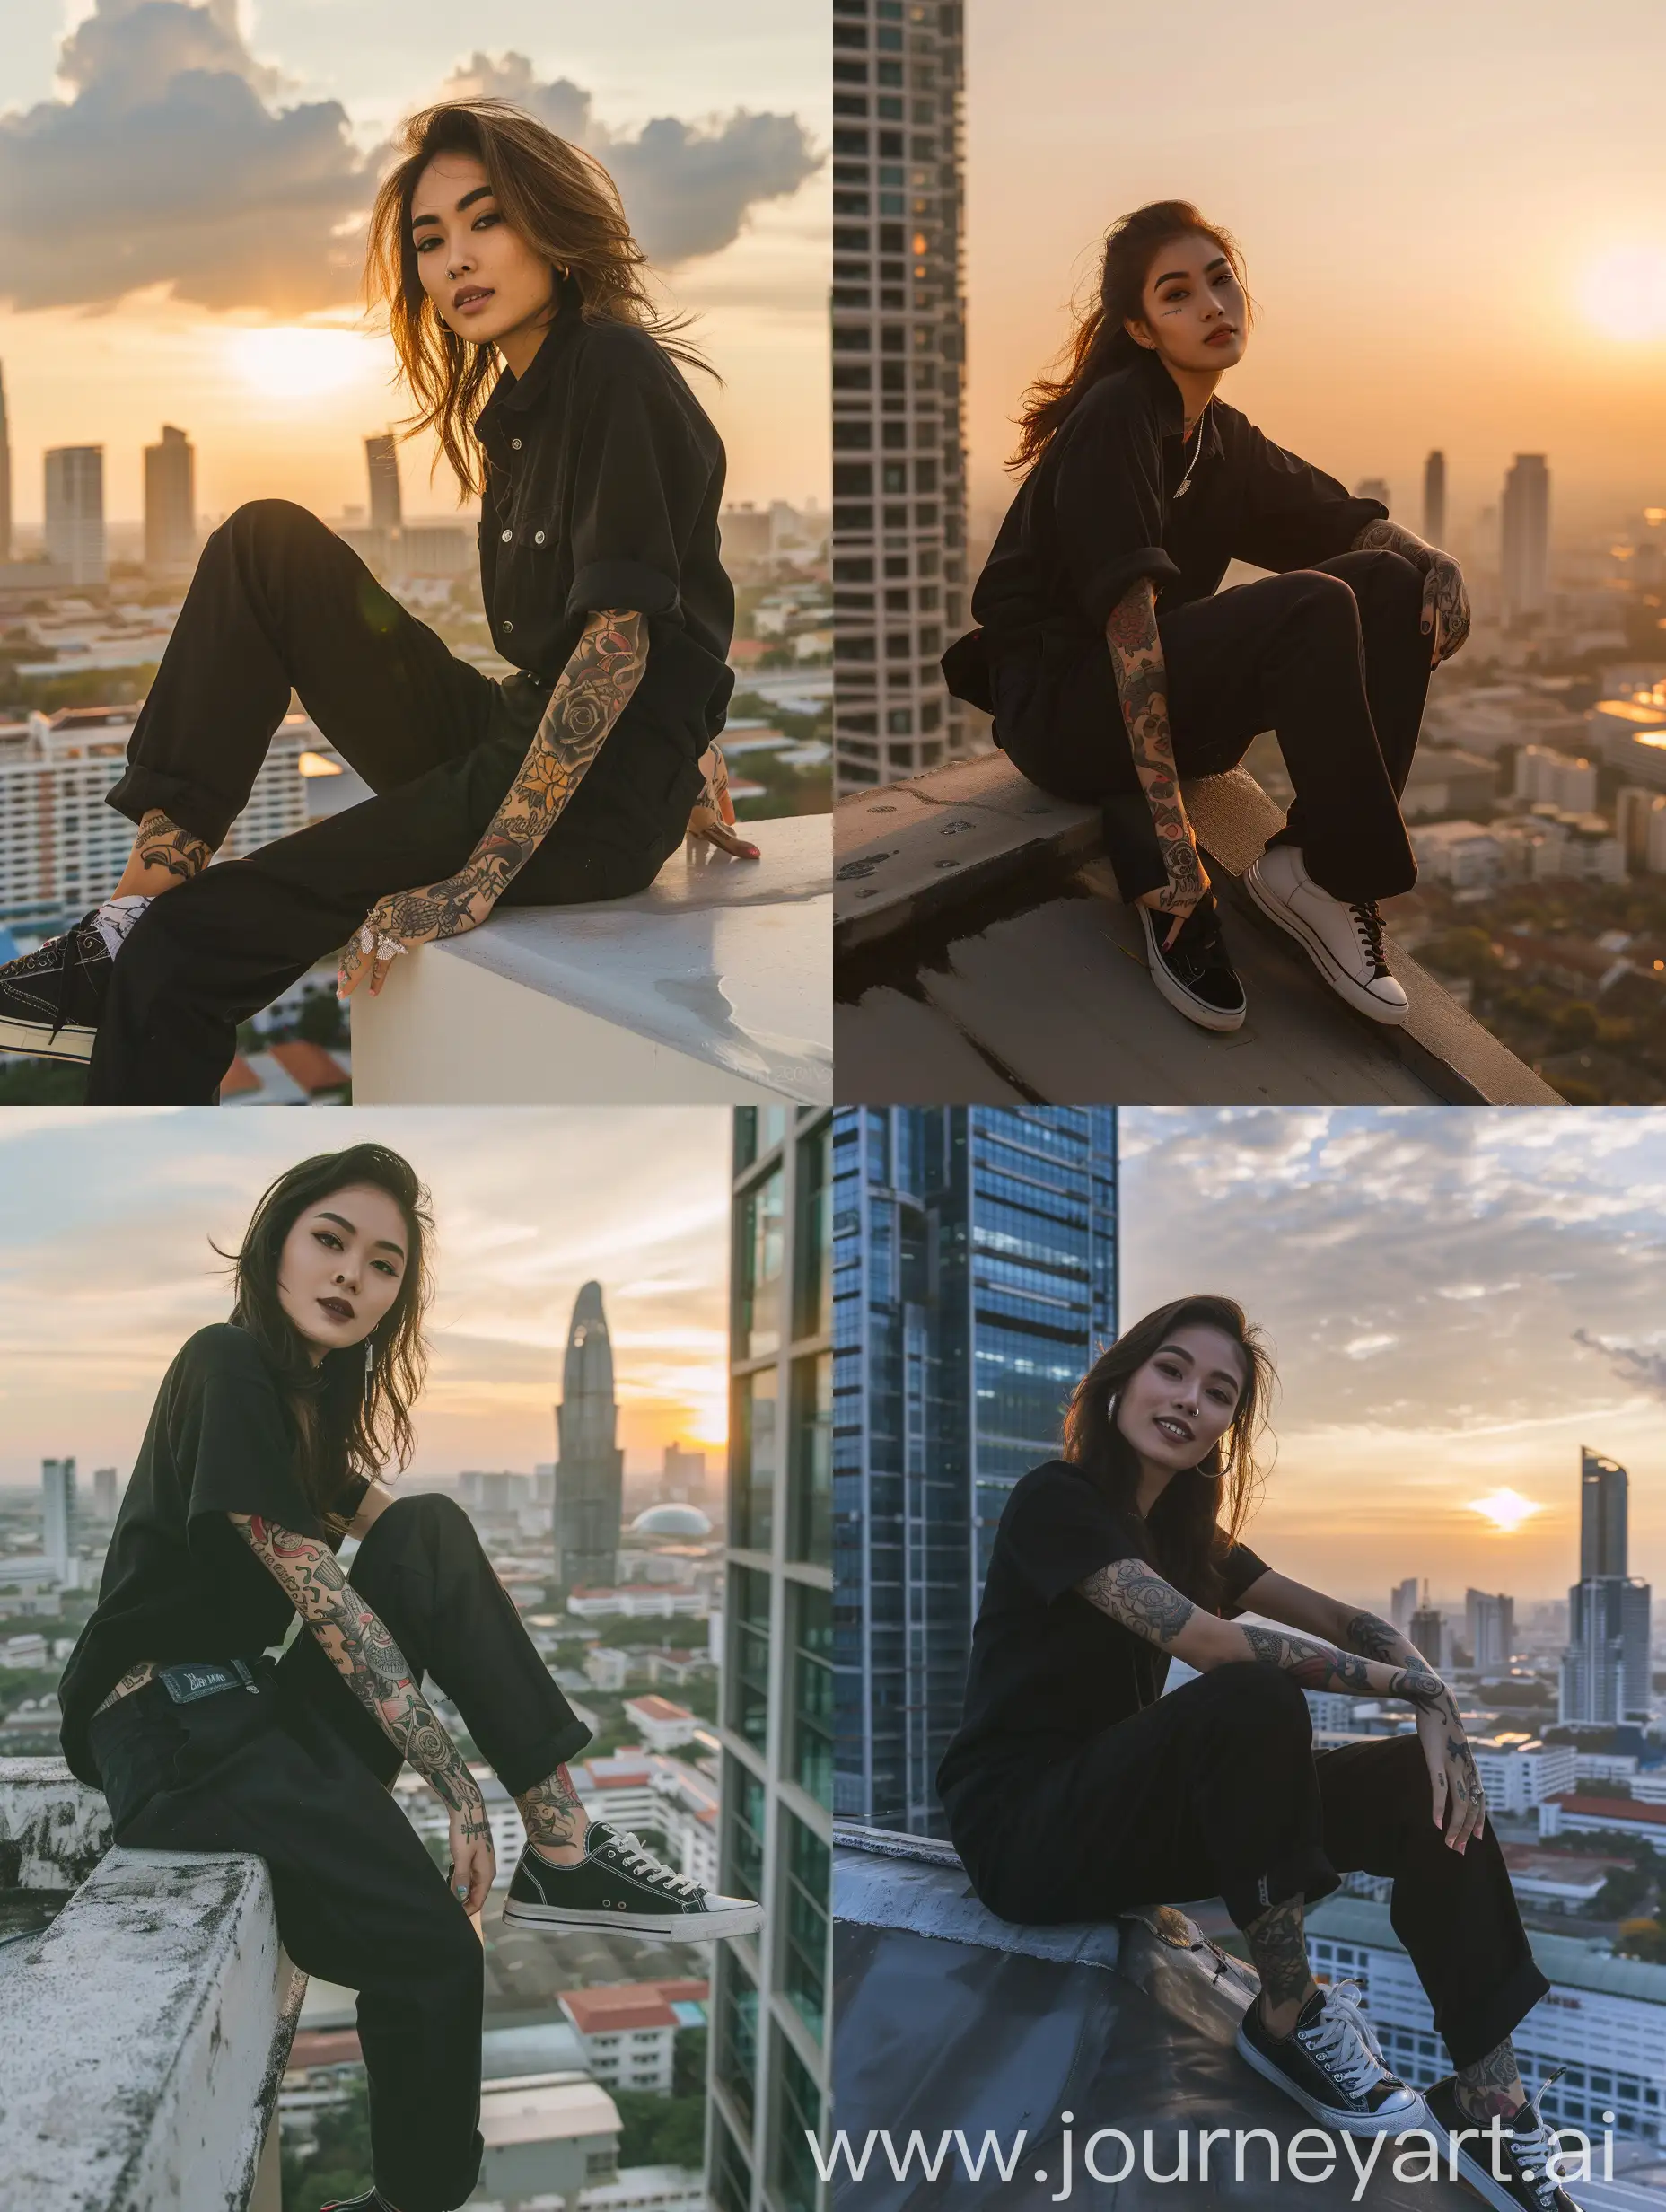 Urban-Morning-Portrait-of-a-Smiling-Thai-Rapper-Woman-on-City-Rooftop